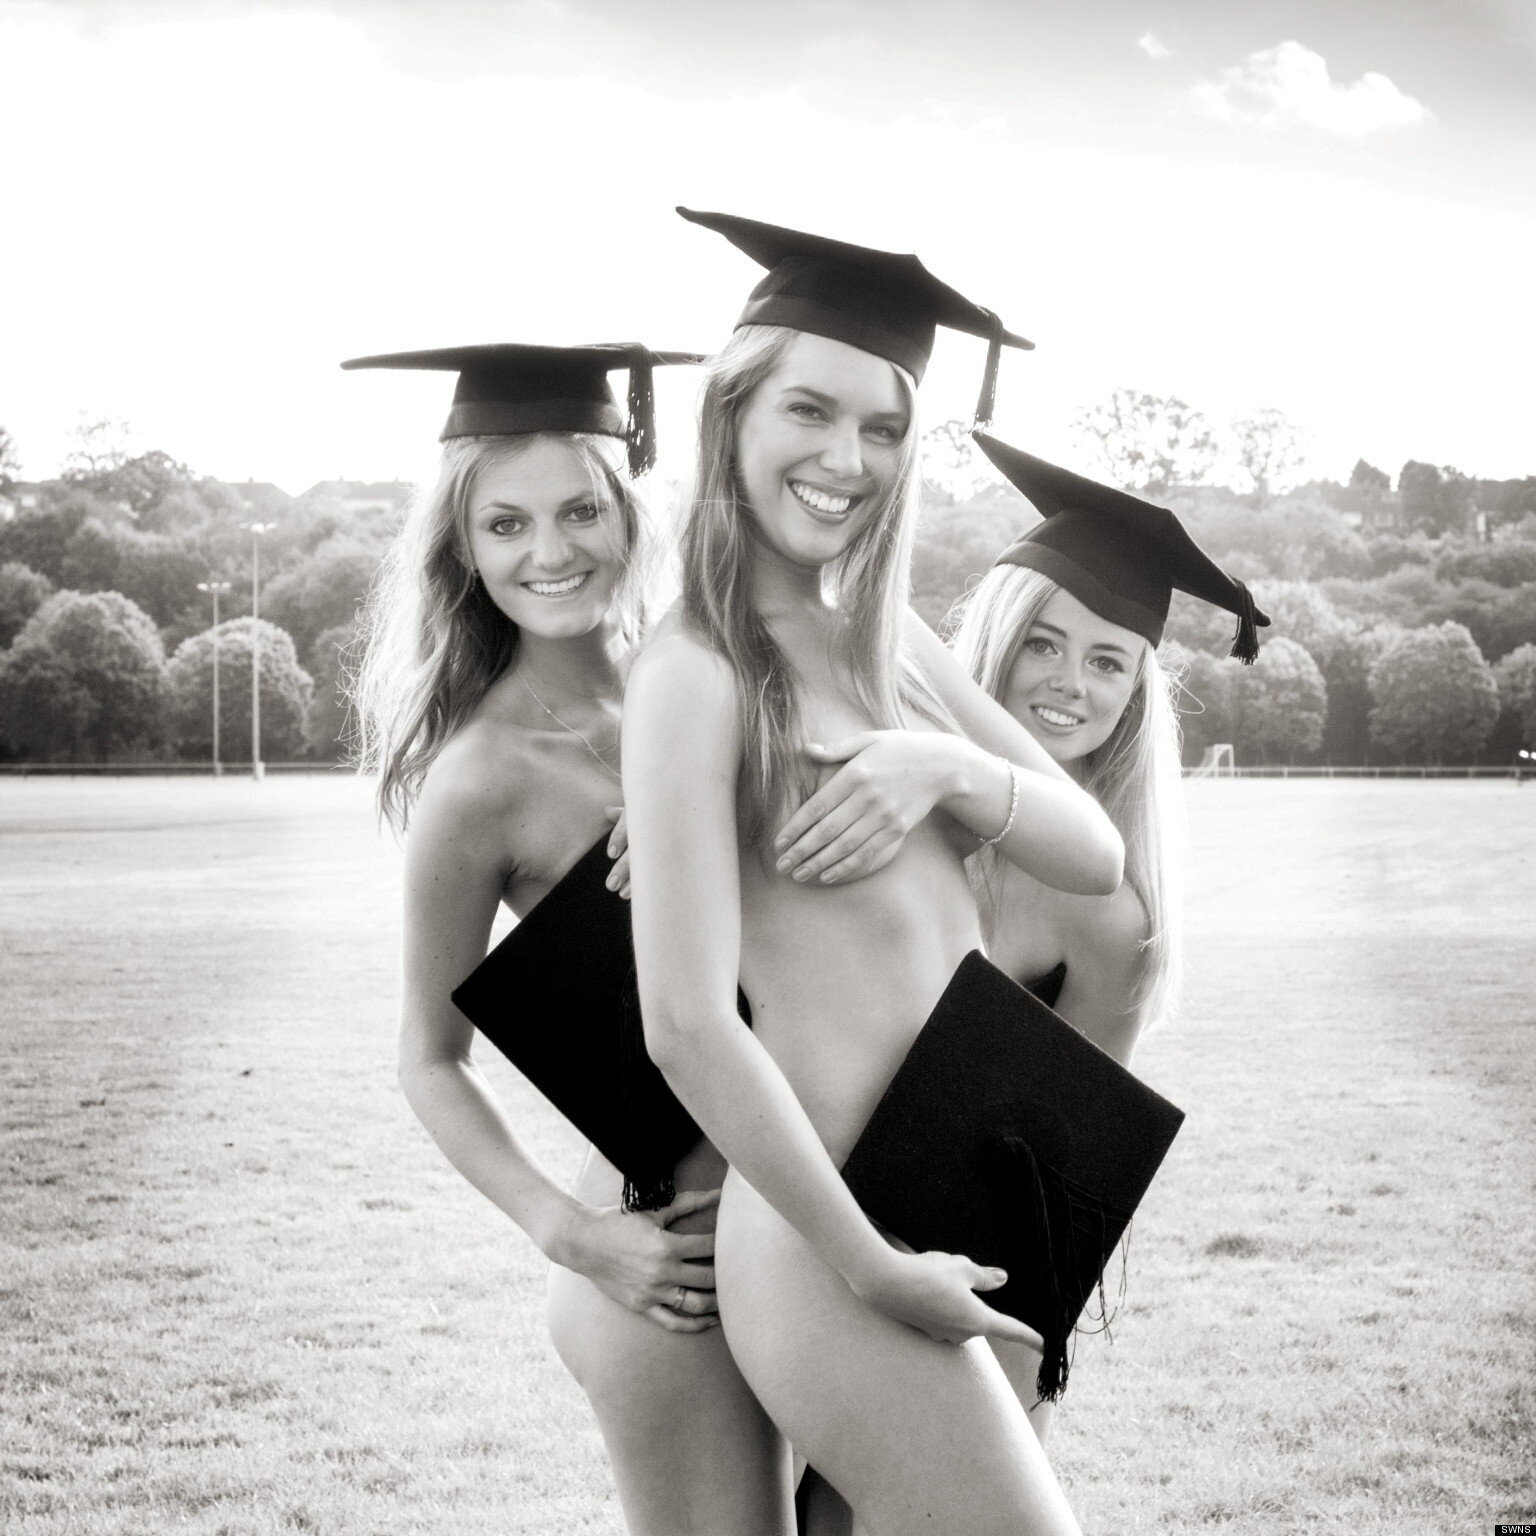 Cardiff University Student Amy Morfoot Strips For Naked Charity Calendar (PICTURES) HuffPost UK Students picture